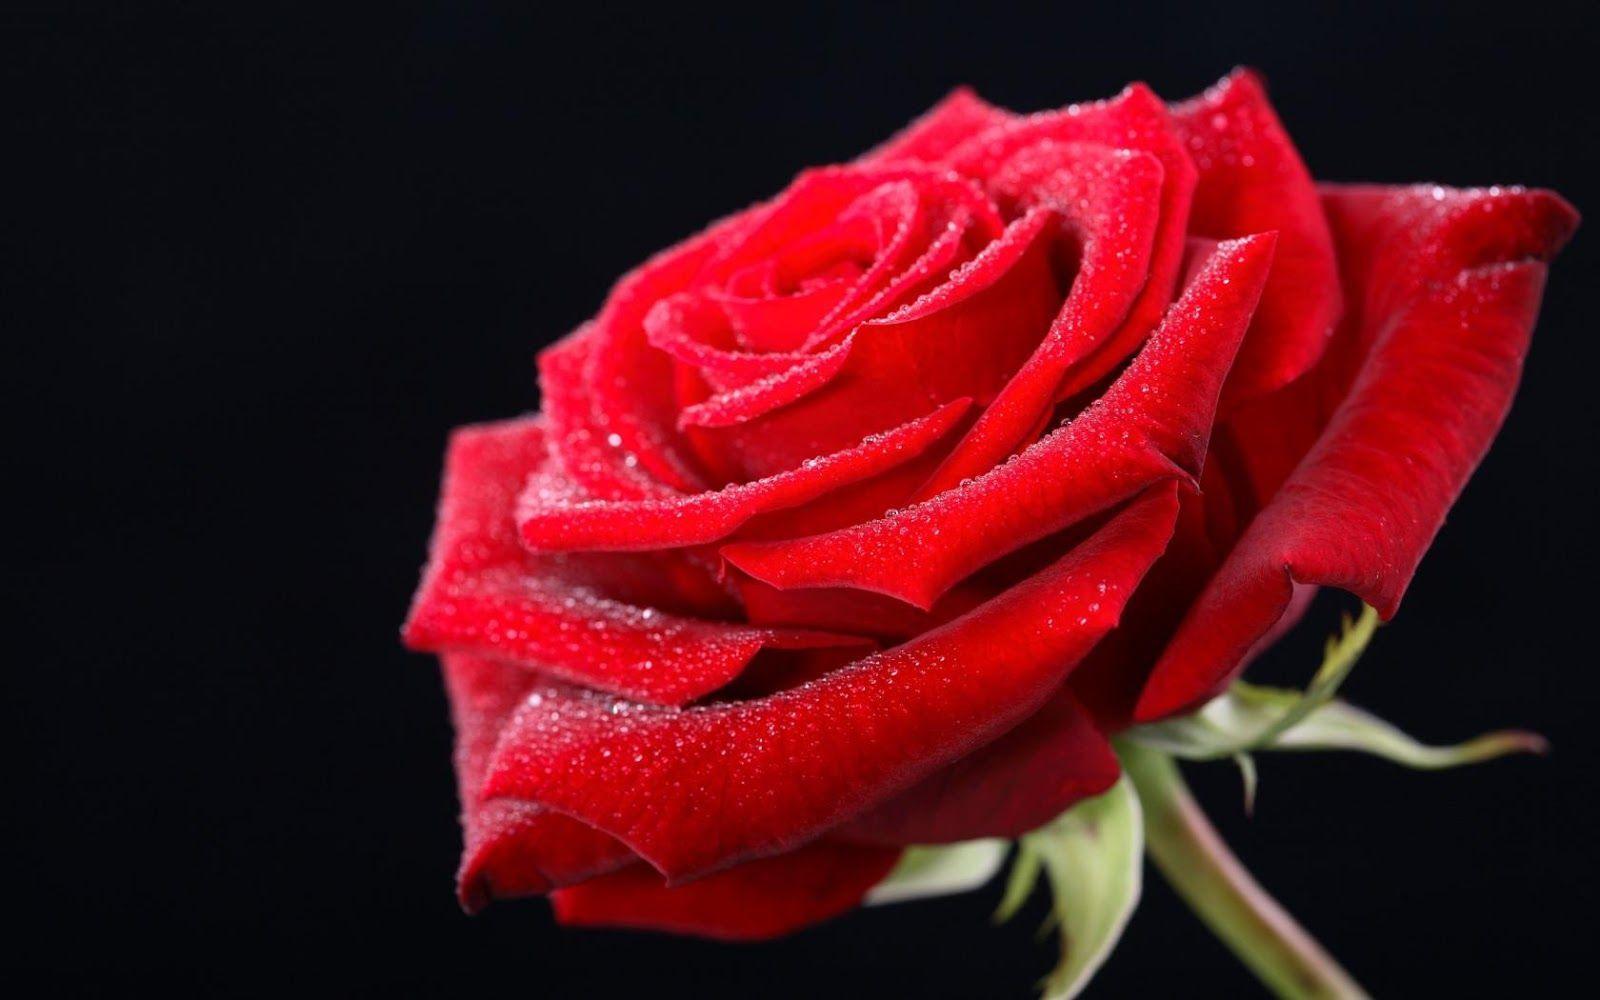 HD Rose Image, Find best latest HD Rose Image in HD for your PC